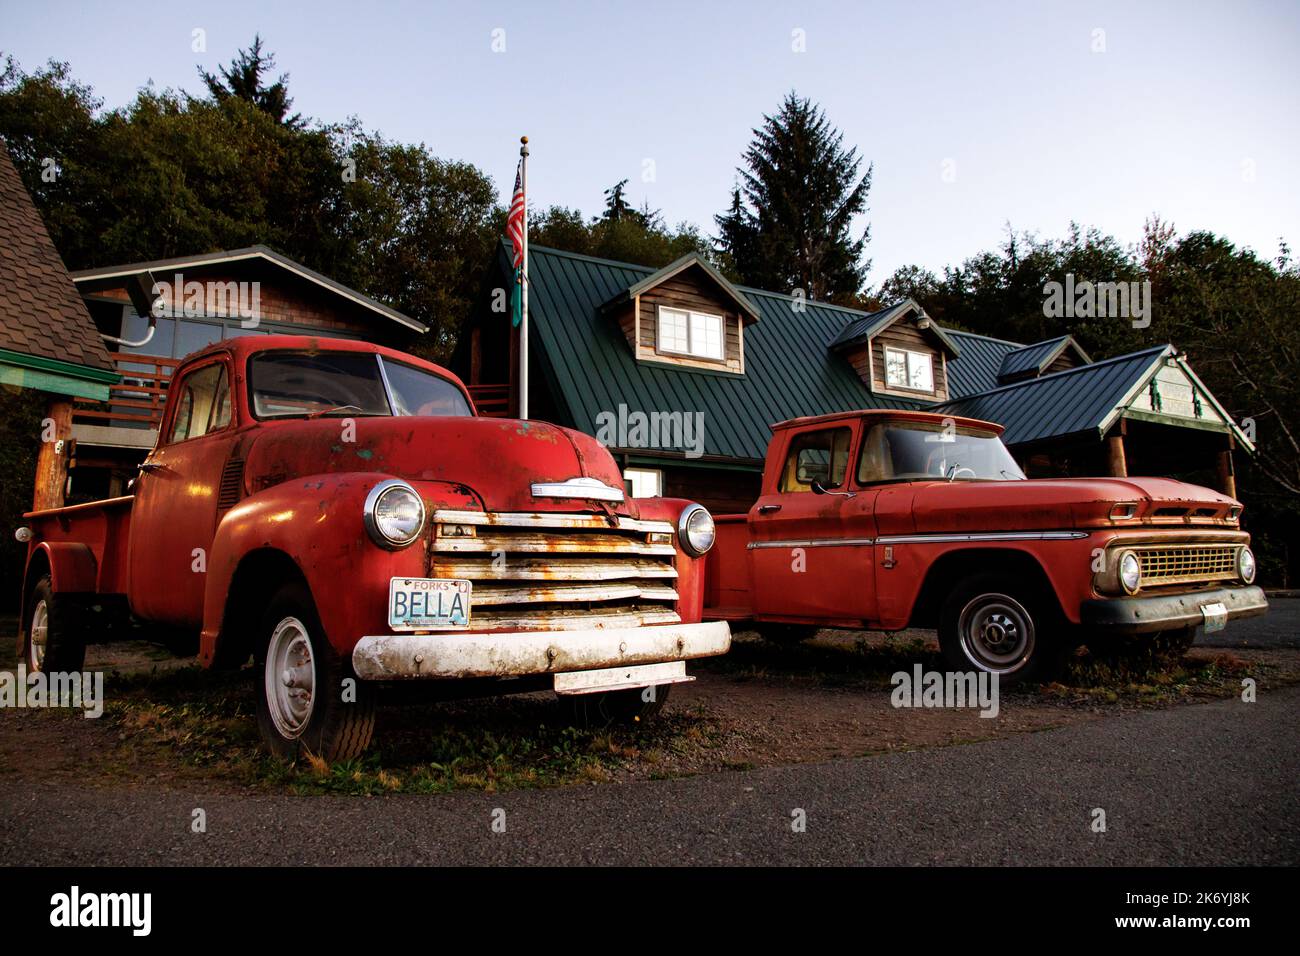 Bella's red rusty truck from Twilight. Legendary Bella's truck in front of Forks visitors center in Washington Stock Photo